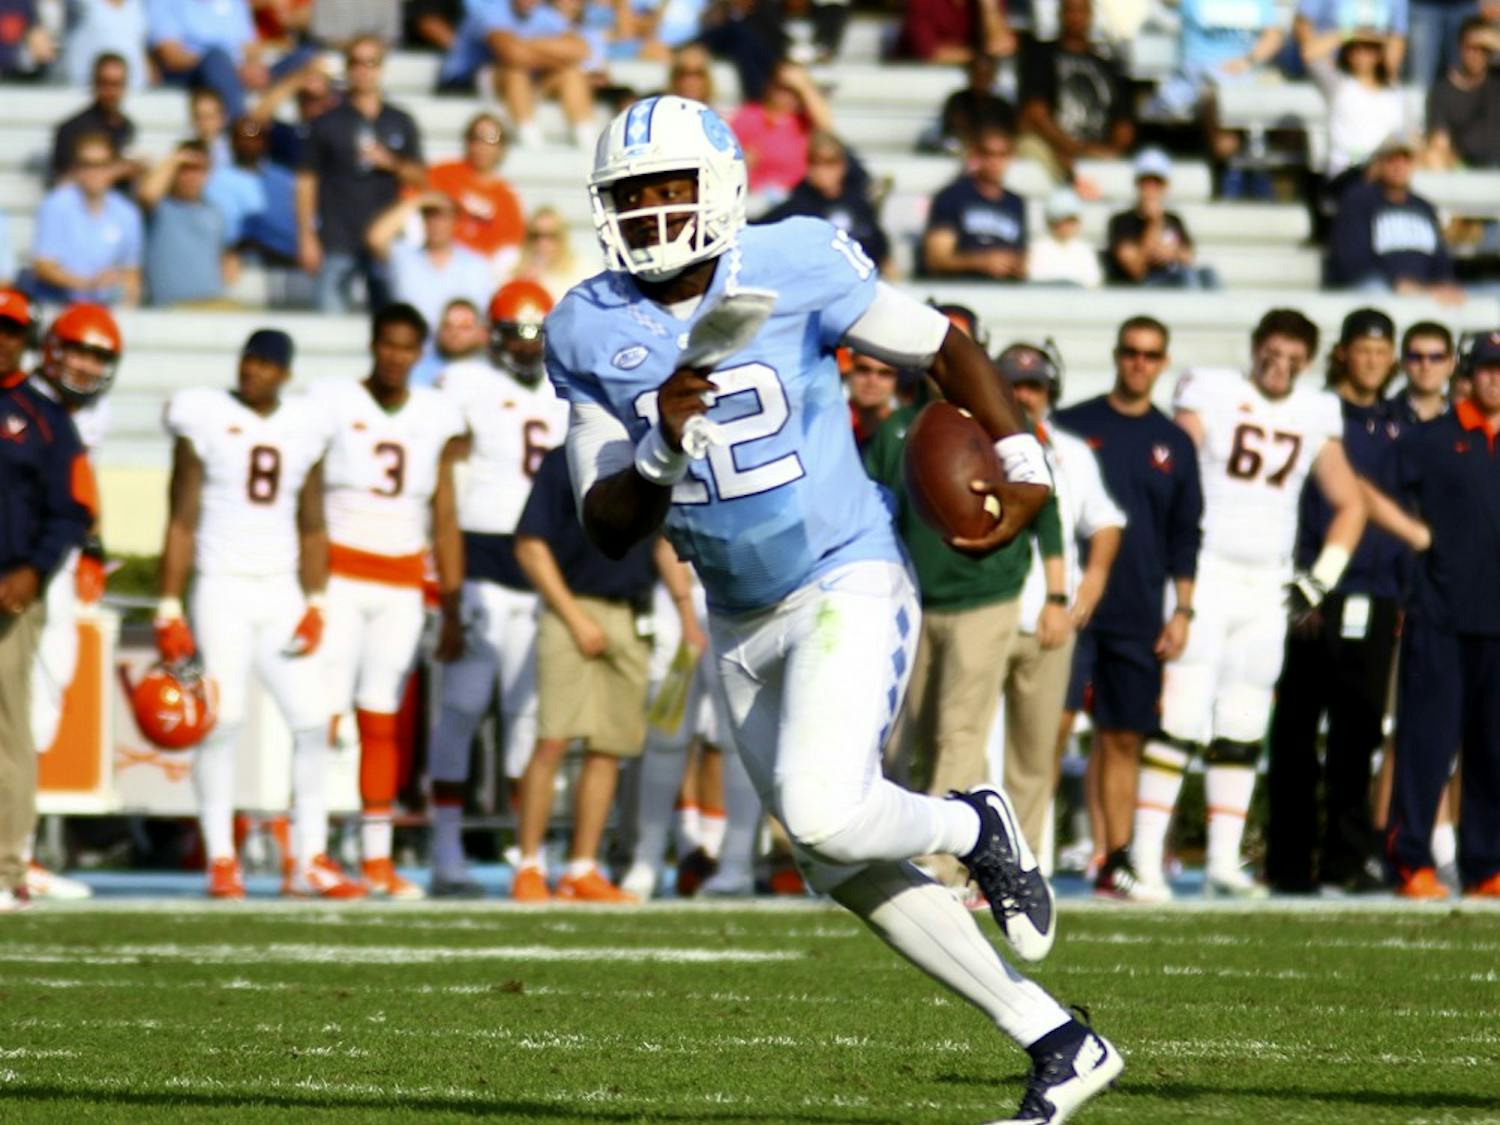 Marquise Williams (12) runs the ball in UNC's win over Virginia on Saturday. Williams netted 71 rushing yards during the game.&nbsp;